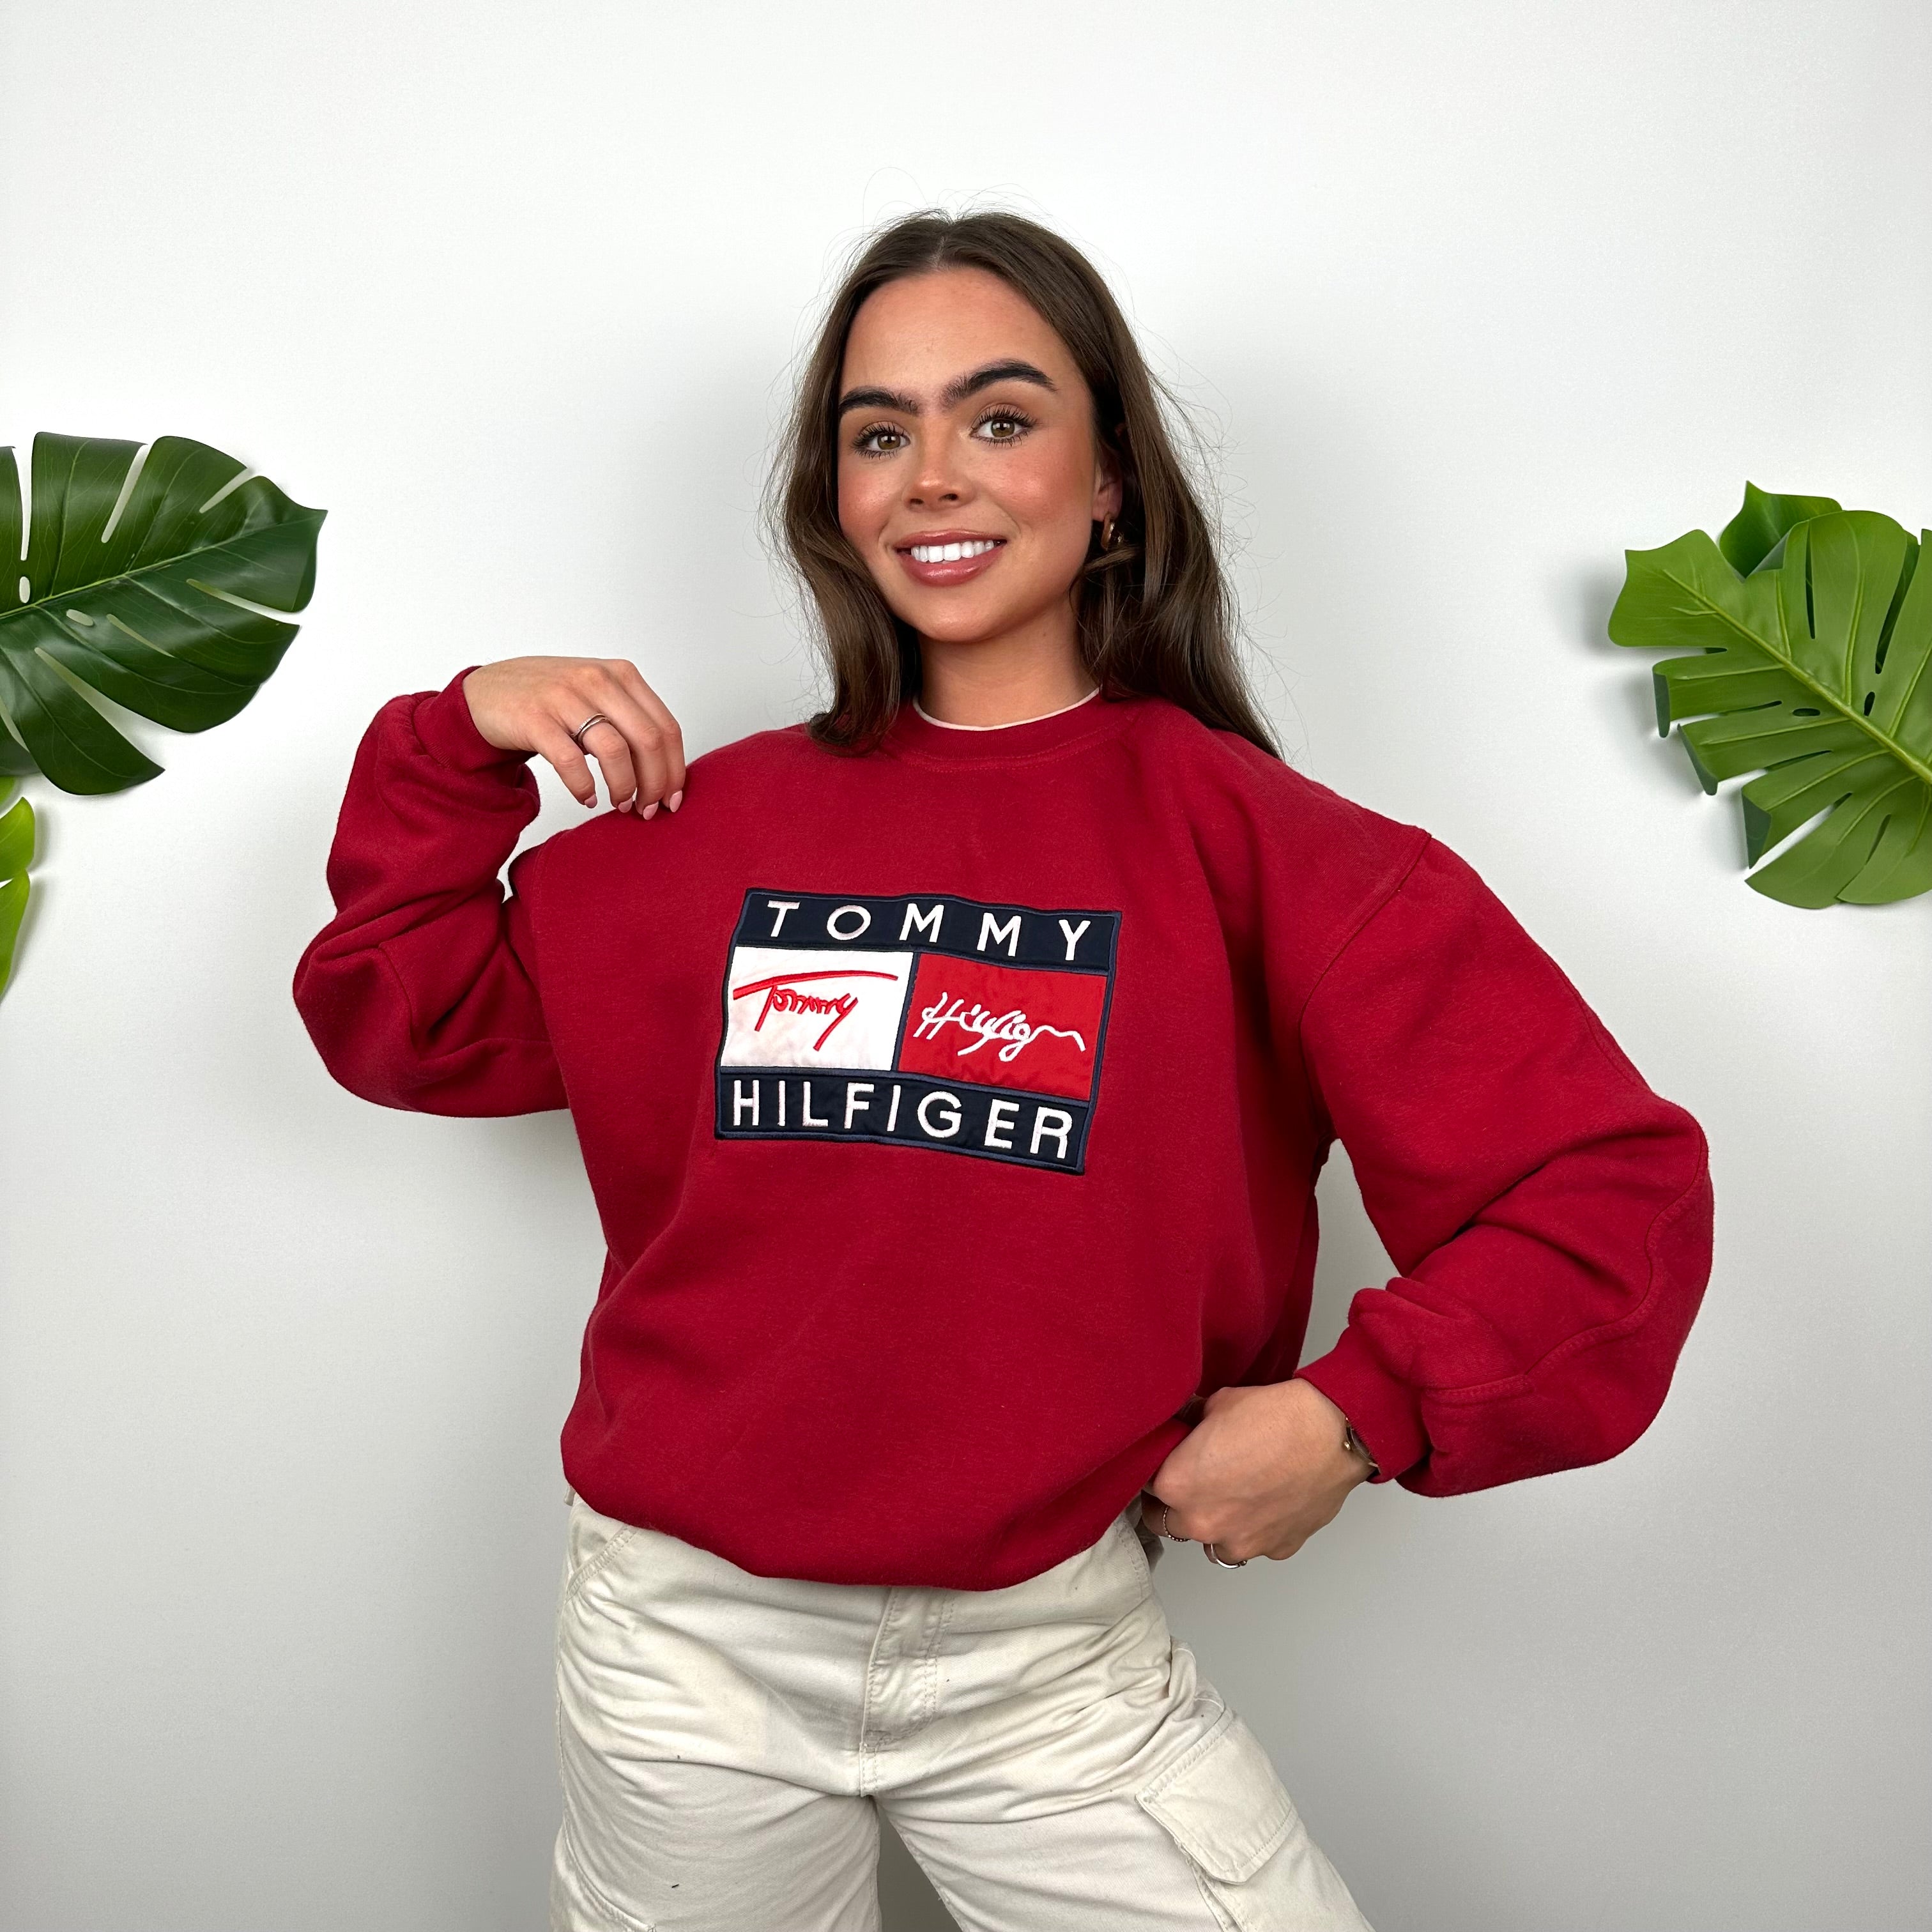 Tommy Hilfiger Red Embroidered Spell Out Sweatshirt (S)